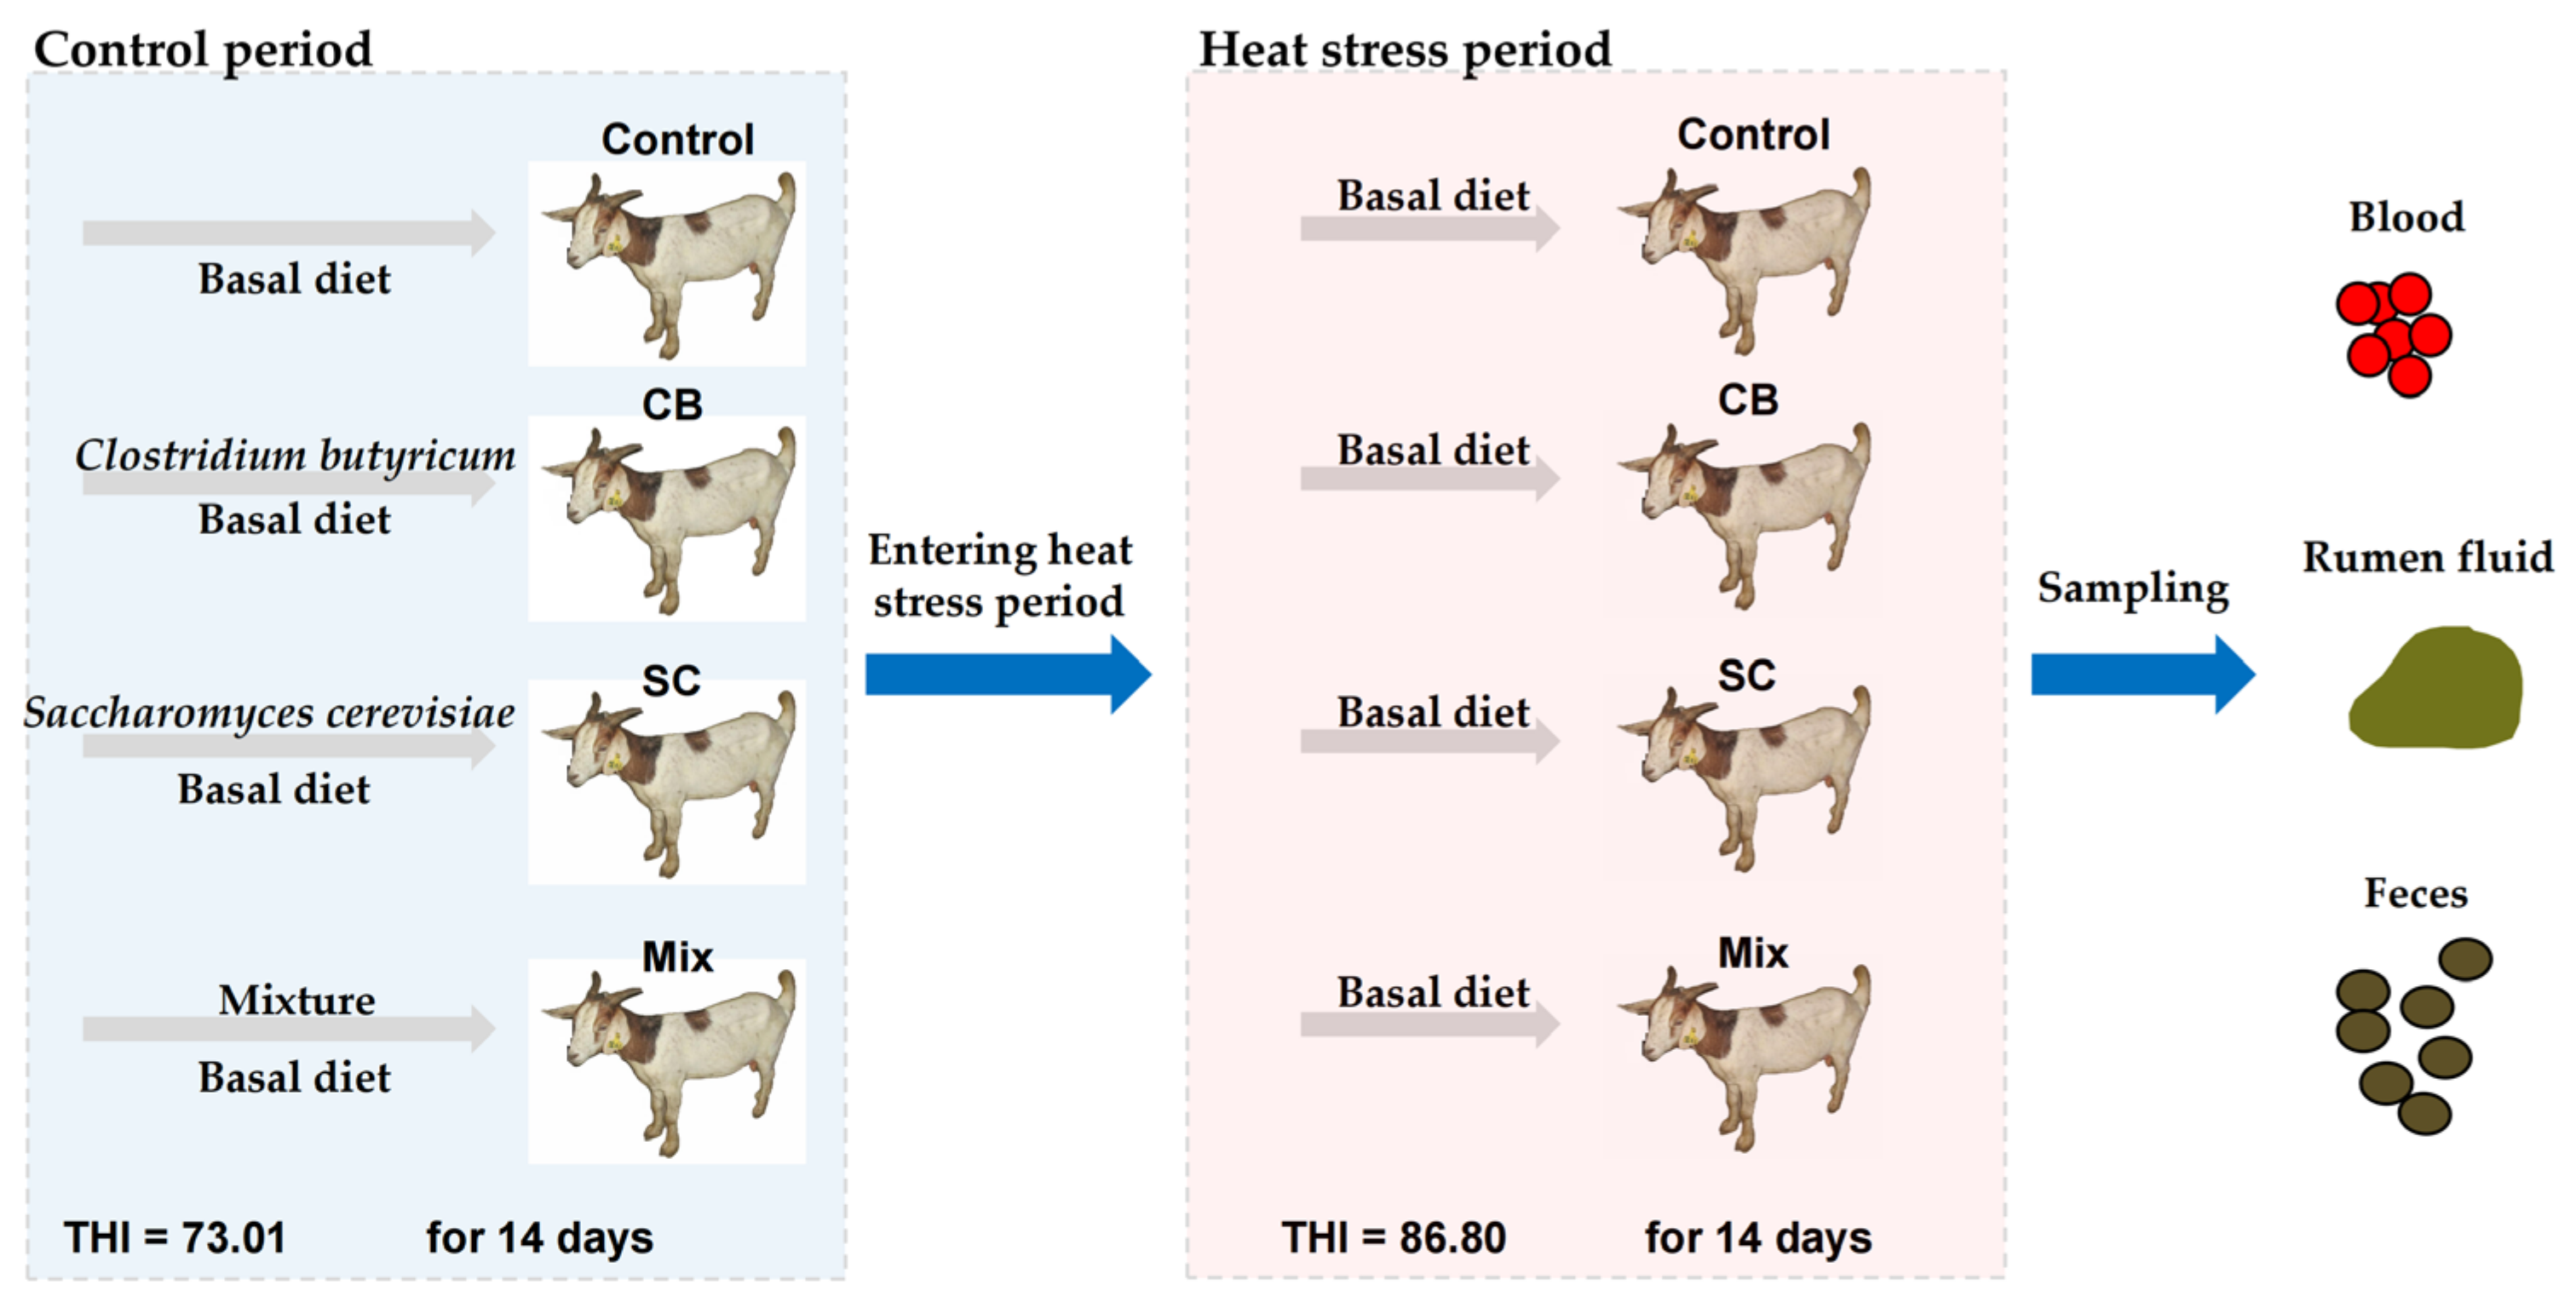 Animals | Free Full-Text | Prophylactic Feeding of Clostridium butyricum  and Saccharomyces cerevisiae Were Advantageous in Resisting the Adverse  Effects of Heat Stress on Rumen Fermentation and Growth Performance in Goats